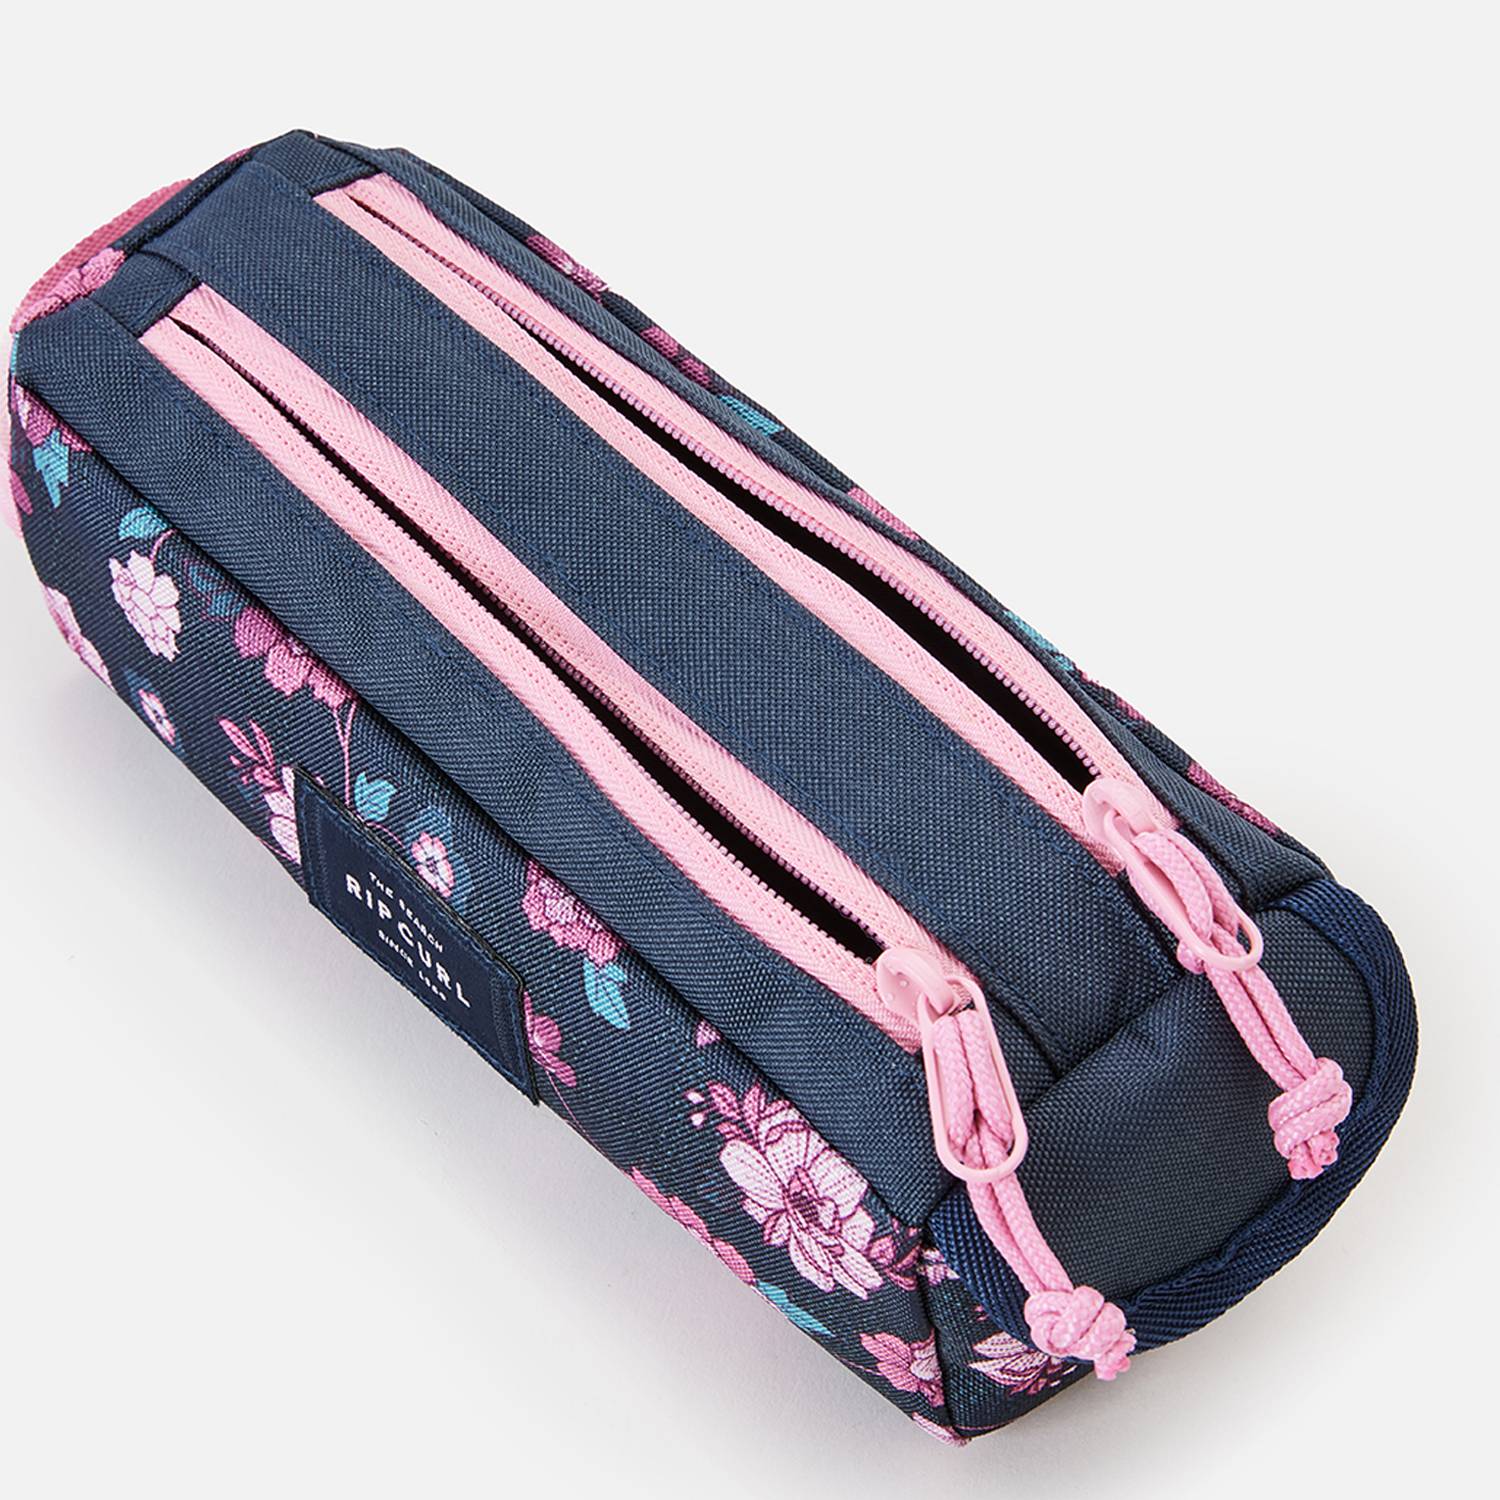 Trousse Rip Curl double compartiments Surf Gypsy 00YWUT couleur Dark Navy, ouvert